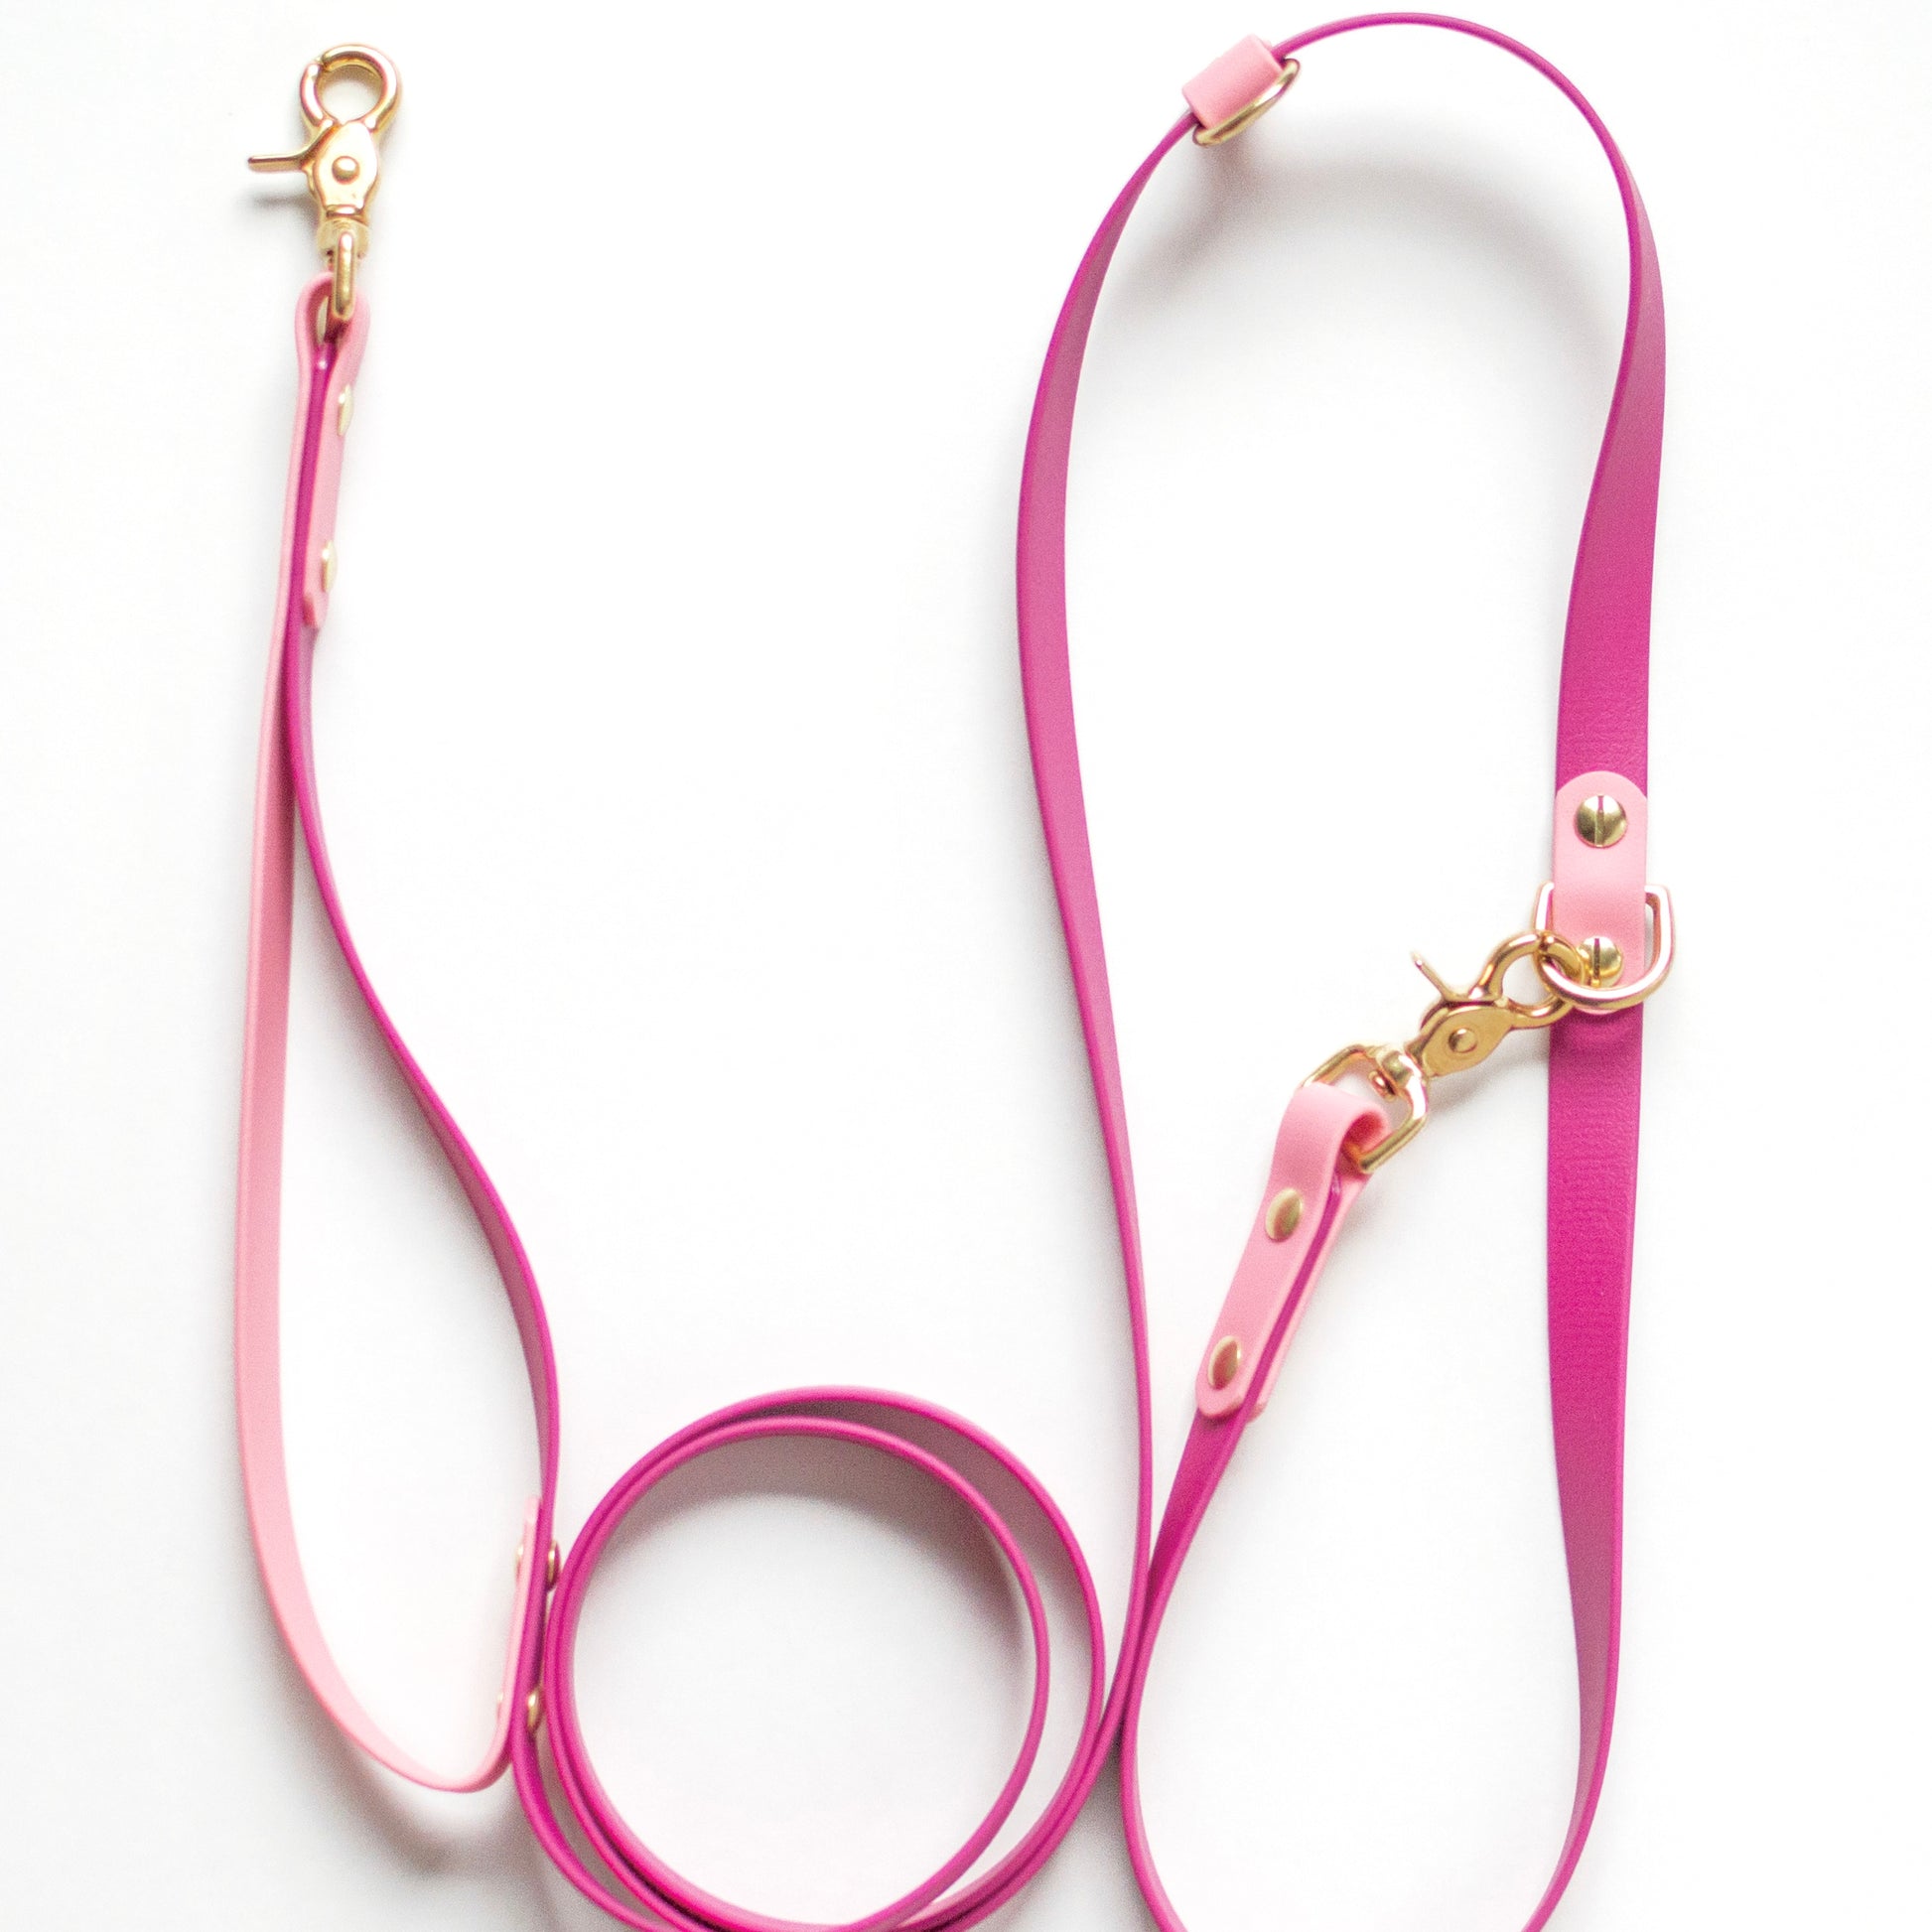 Two-tone biothane hands free dog leash. Vegan Leather. Handmade with biothane and solid brass hardware in British Columbia, Canada.